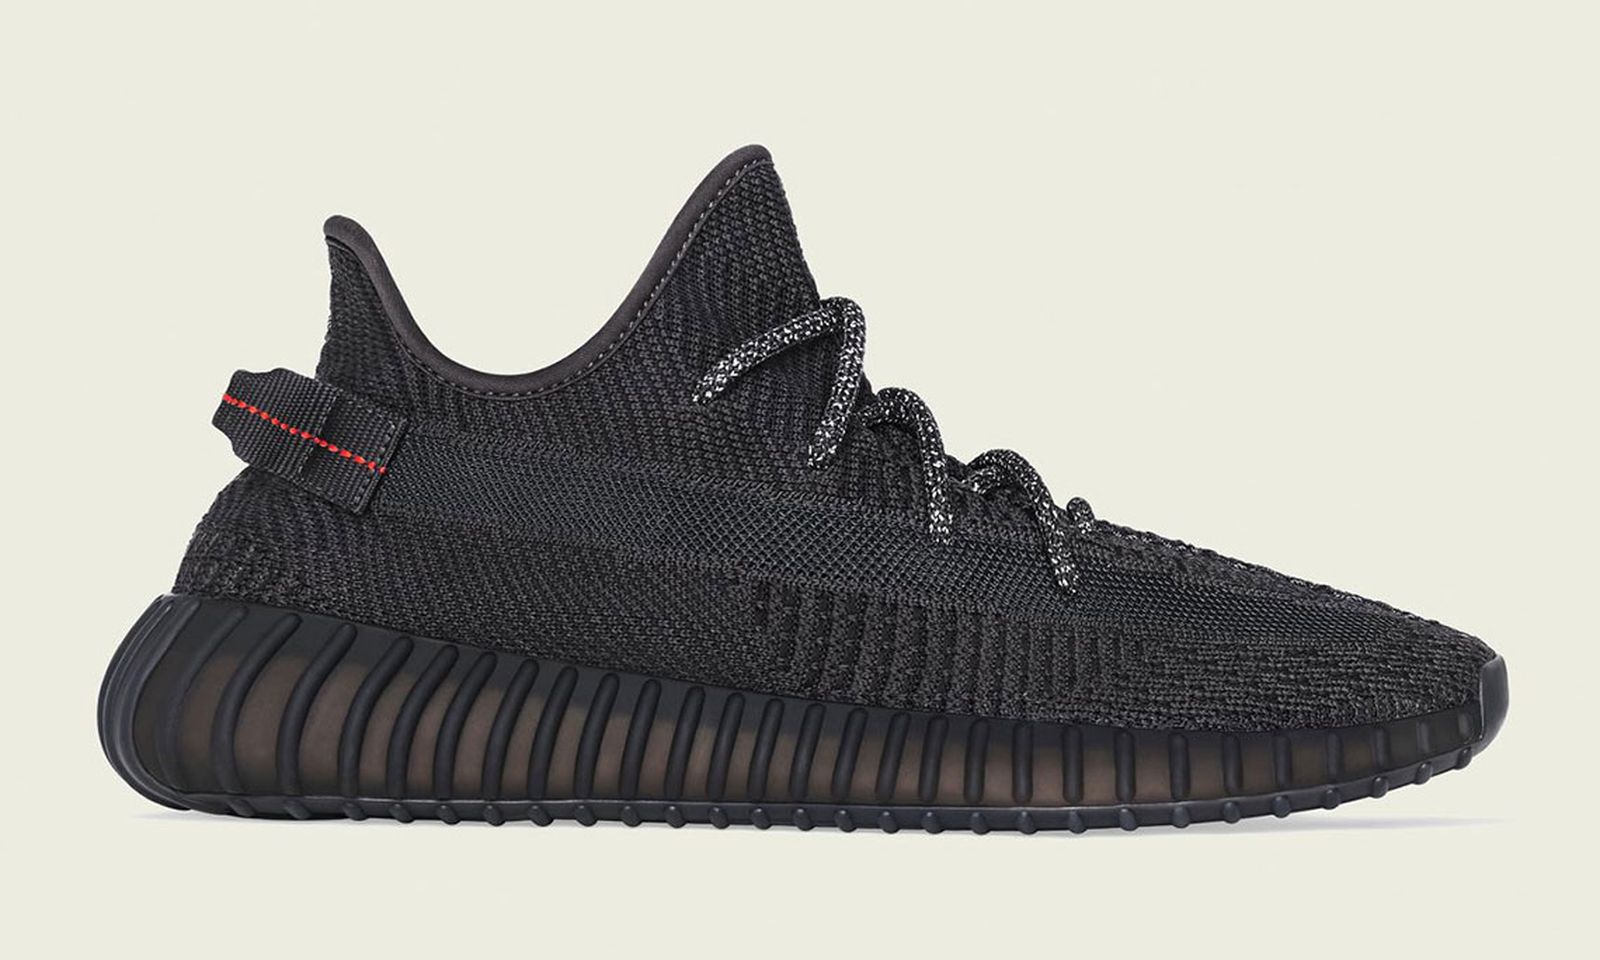 Remission Uartig Pickering The adidas YEEZY Boost 350 V2 "Black Reflective" Is Now at StockX